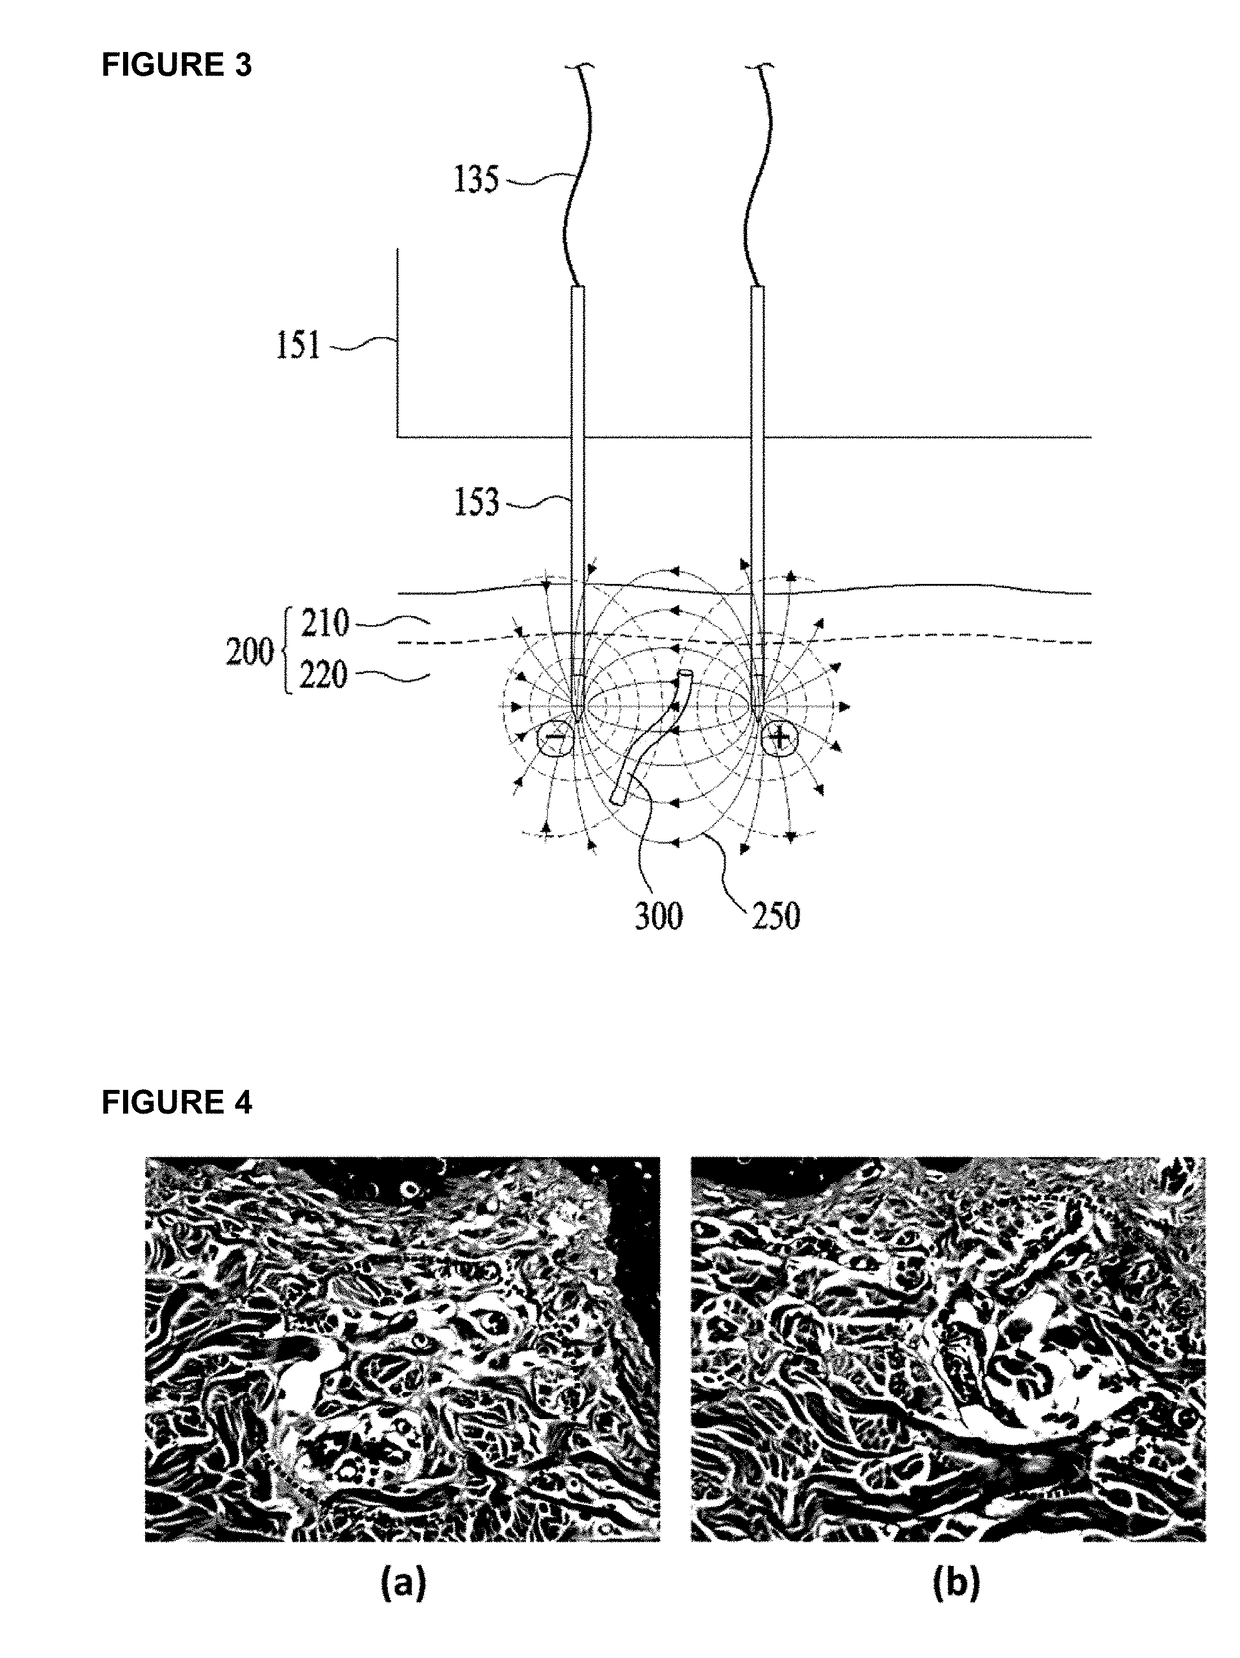 Apparatus for treating blood vessels in skin